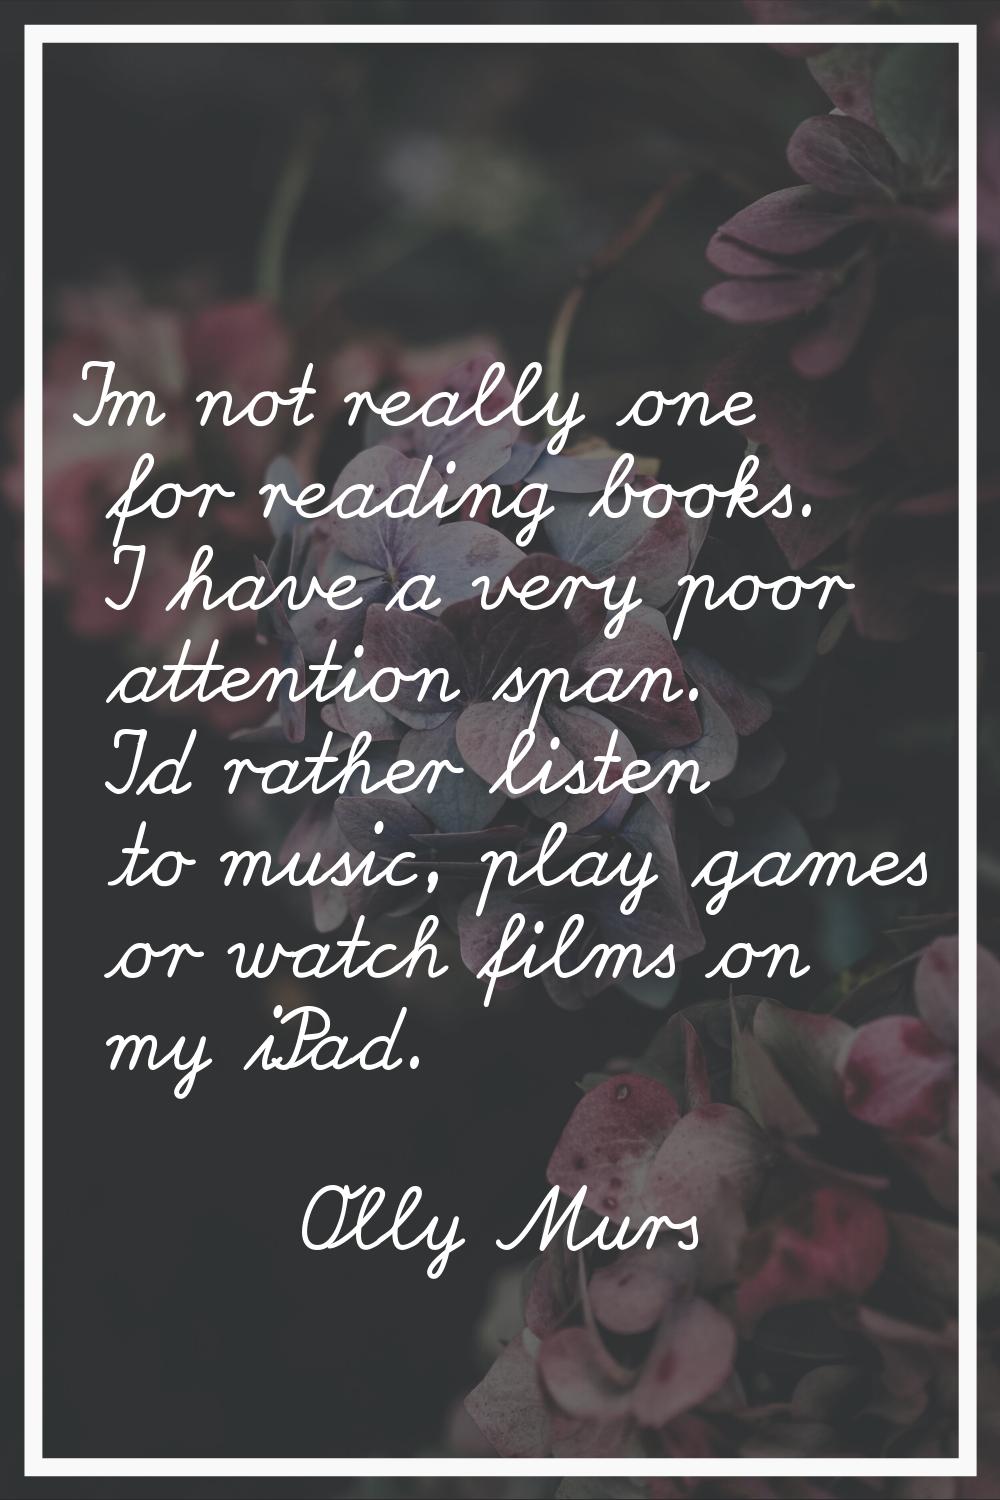 I'm not really one for reading books. I have a very poor attention span. I'd rather listen to music